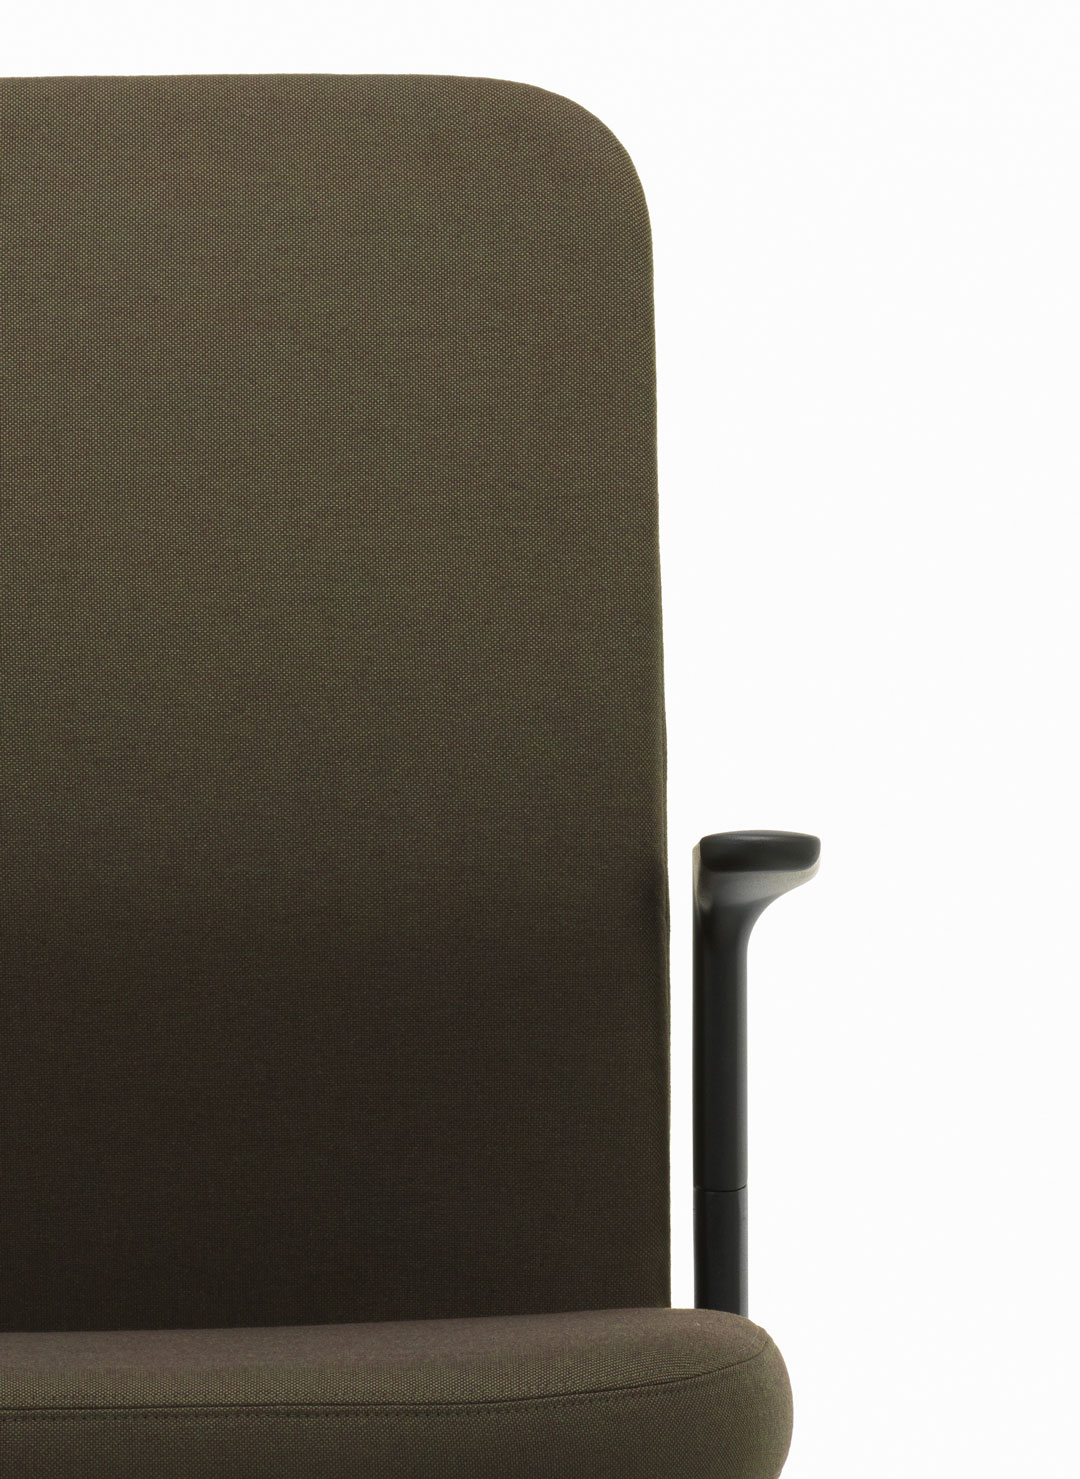 Pacific Chair fixed arm rest, Vitra, 2016